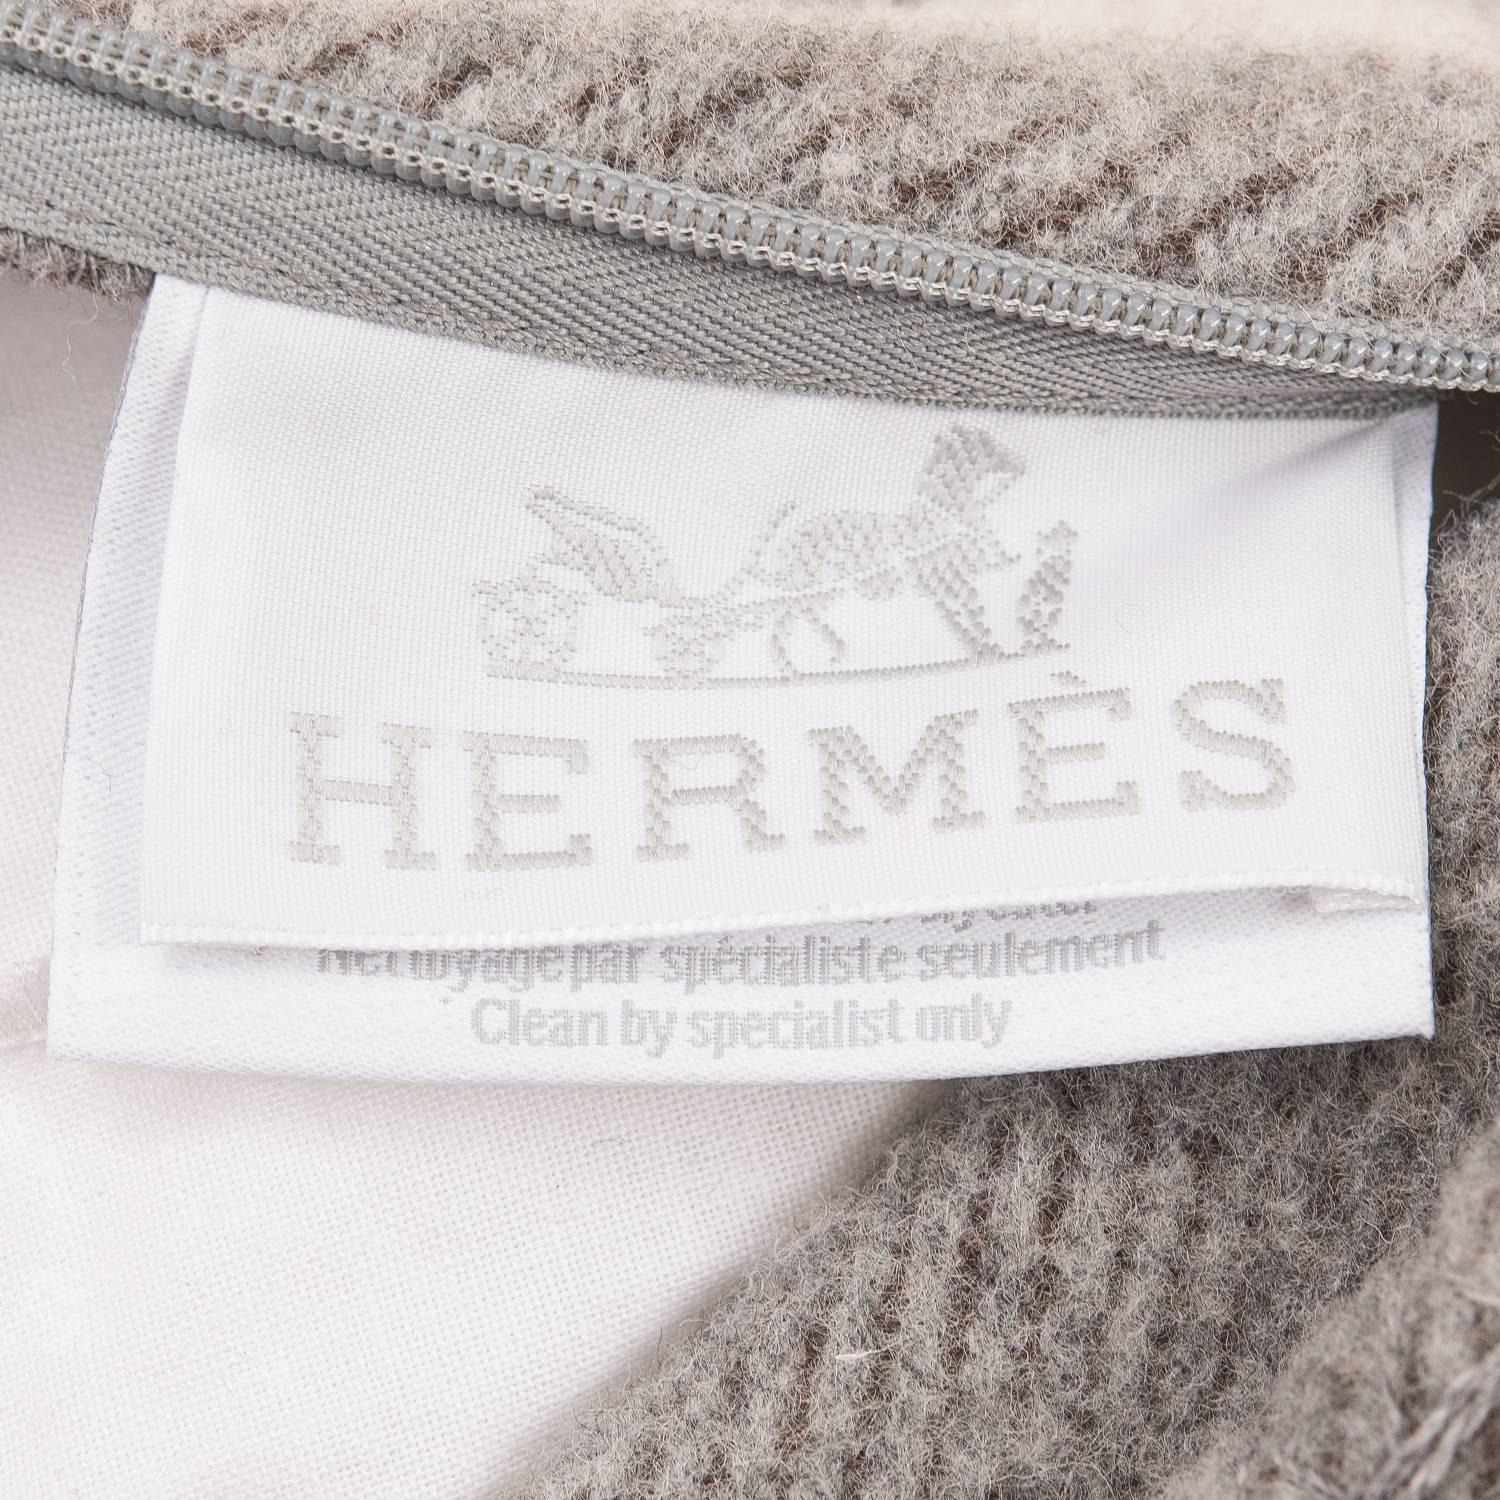 Hermes Avalon Signature H cushion (pillow) in ecru and light grey size PM

The Avalon Signature H cover is made of 85% wool, and 15% cashmere and is removable so it can be dry cleaned.

The interior cushion measures 18.9